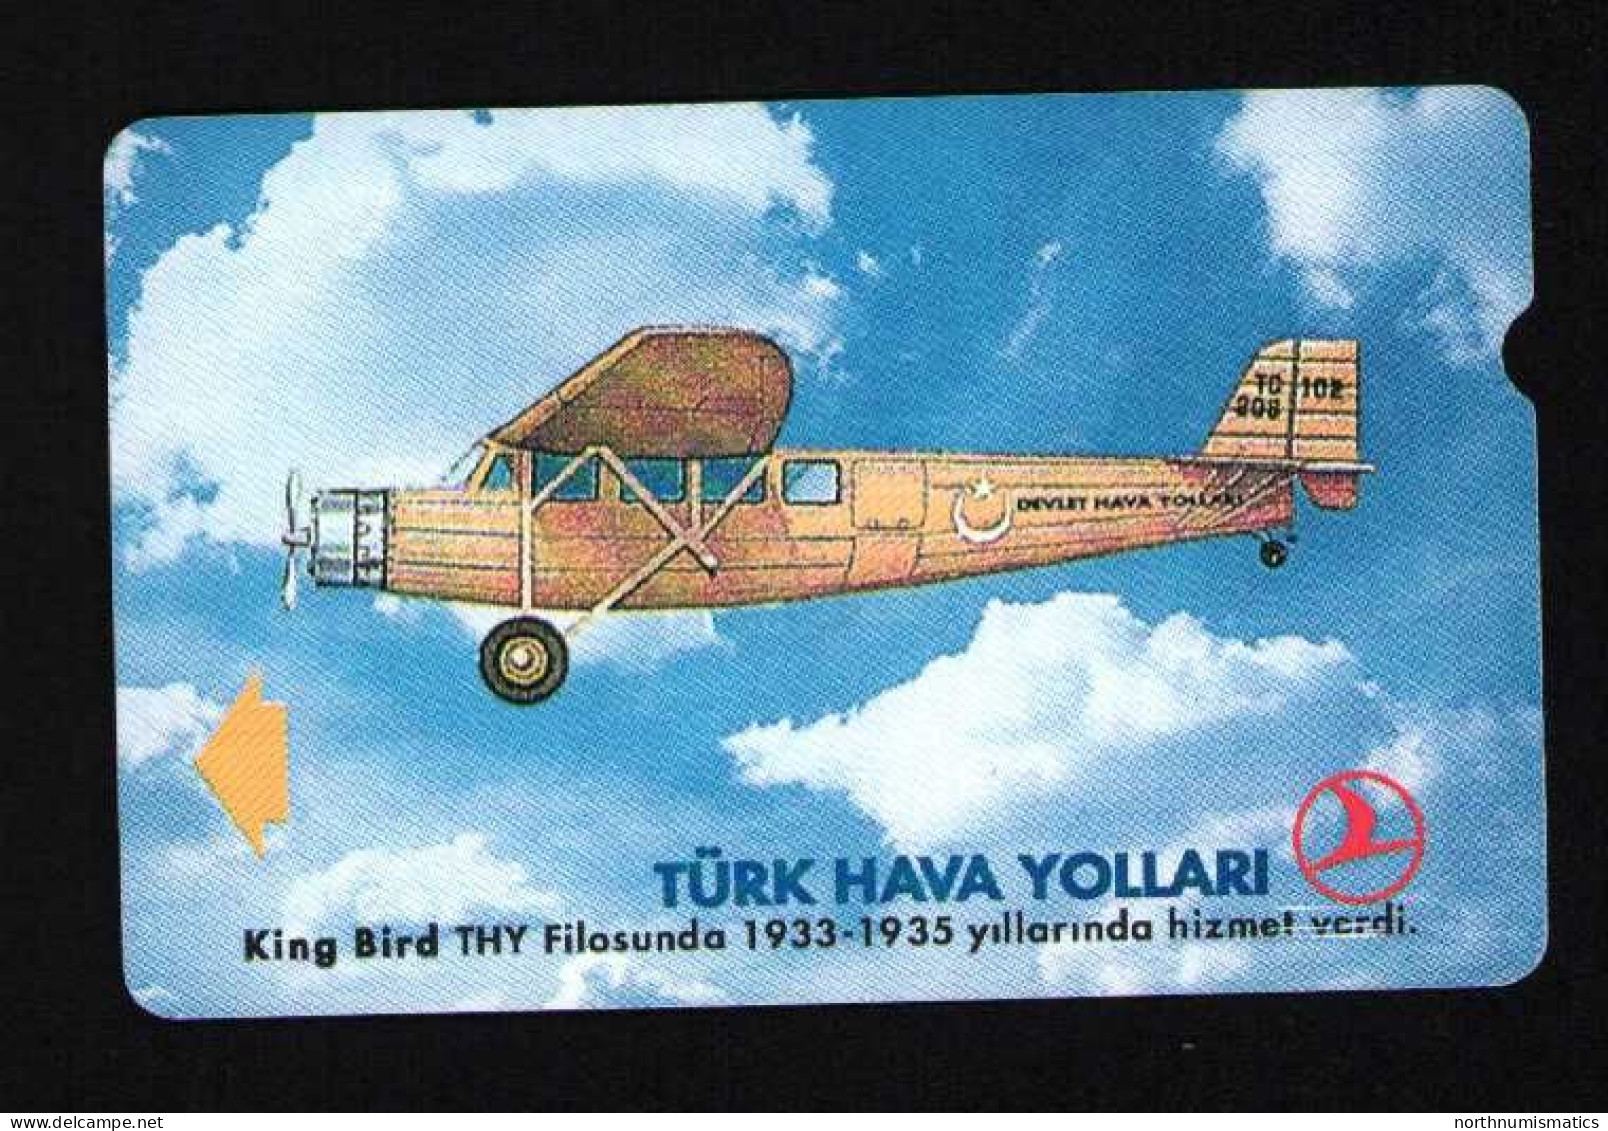 Turkıye Phonecards-THY King Bird 100 Units PTT Unused - Lots - Collections